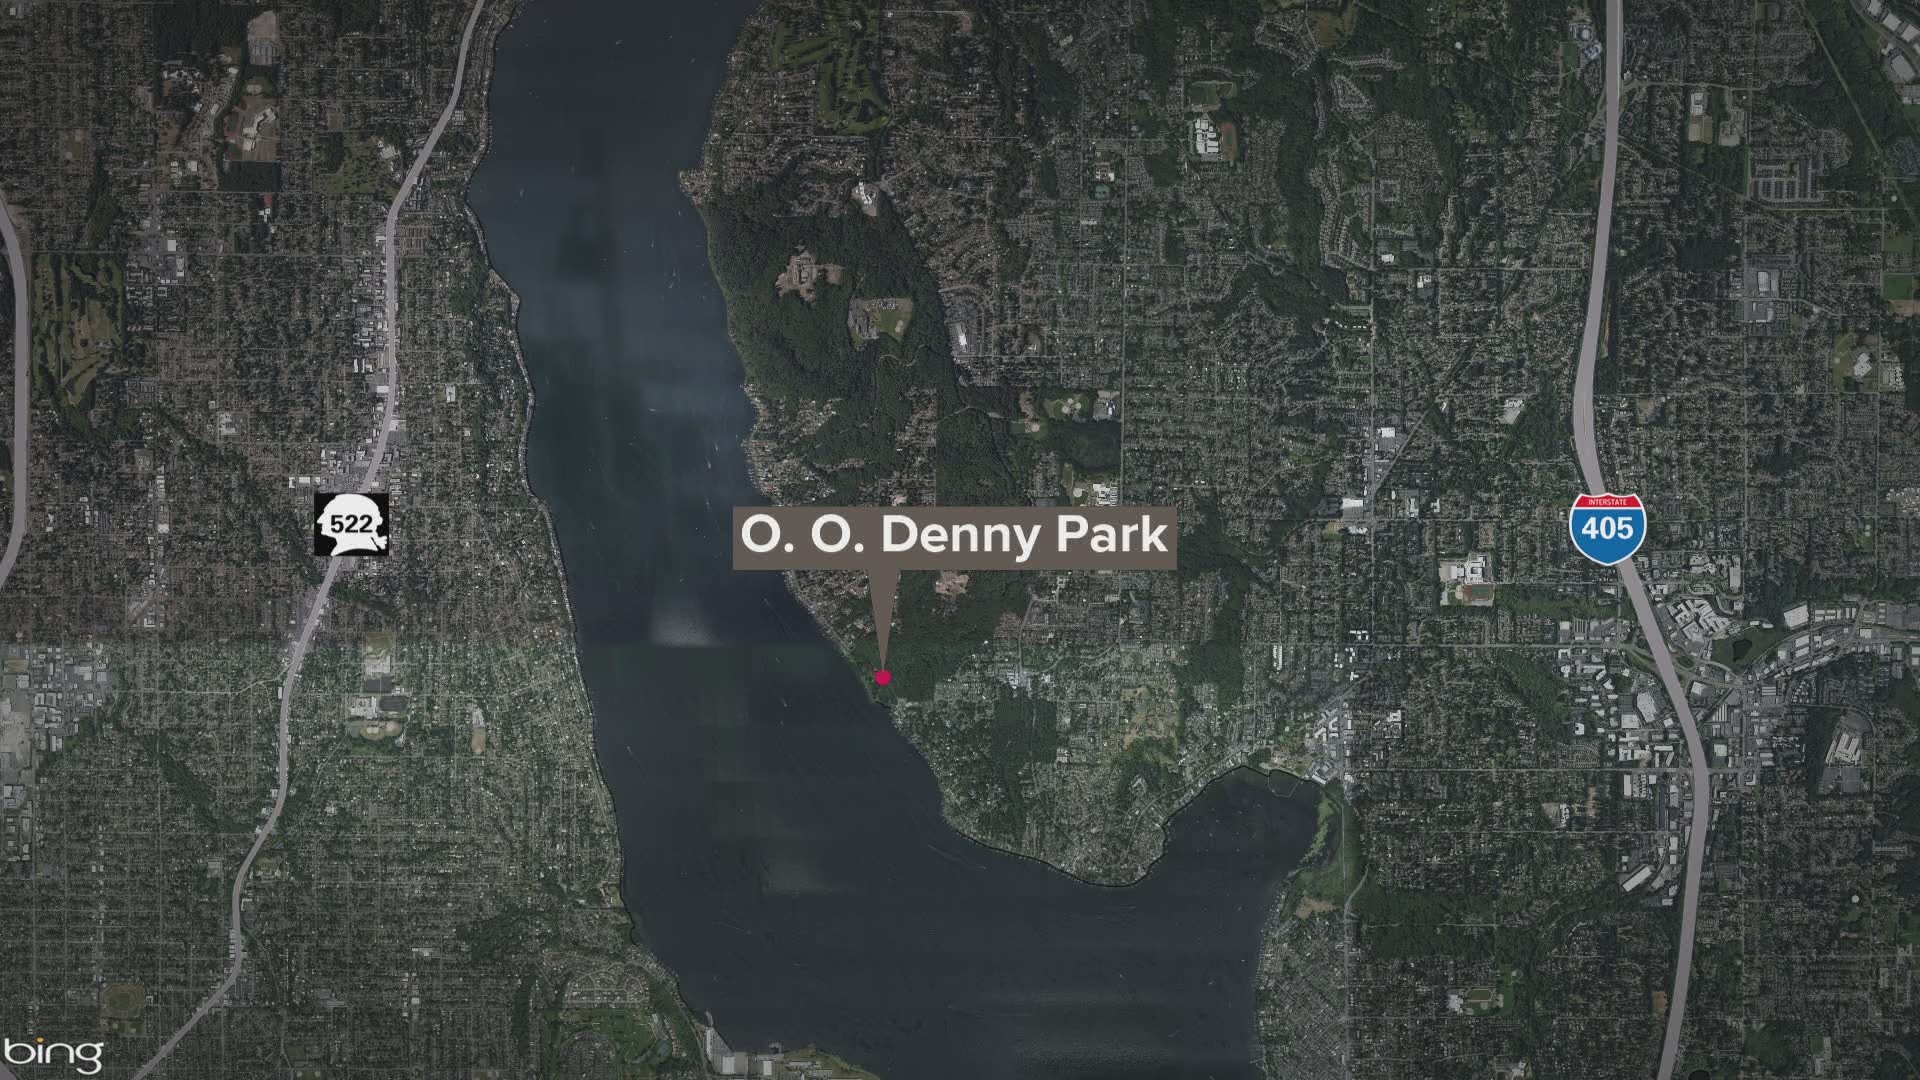 A man in his 40s was pulled from Lake Washington near O.O. Denny Park Sunday. Citizens and first responders performed CPR, but the man did not survive.